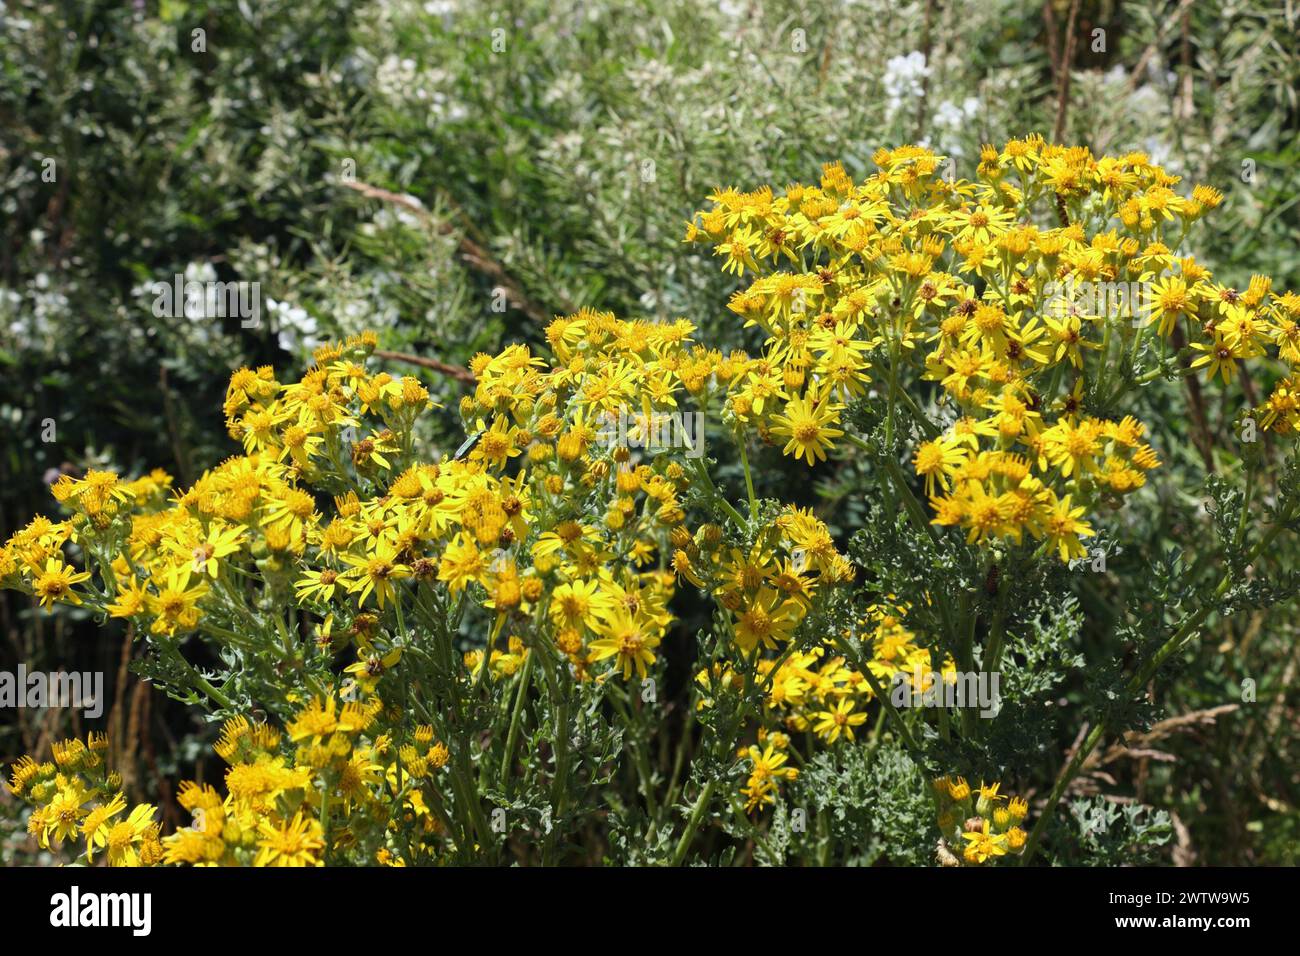 Former waste ground in Cardiff Bay Atlantic wharf area Wales UK, now built upon and lost biodiversity wildflowers Ragwort Stock Photo